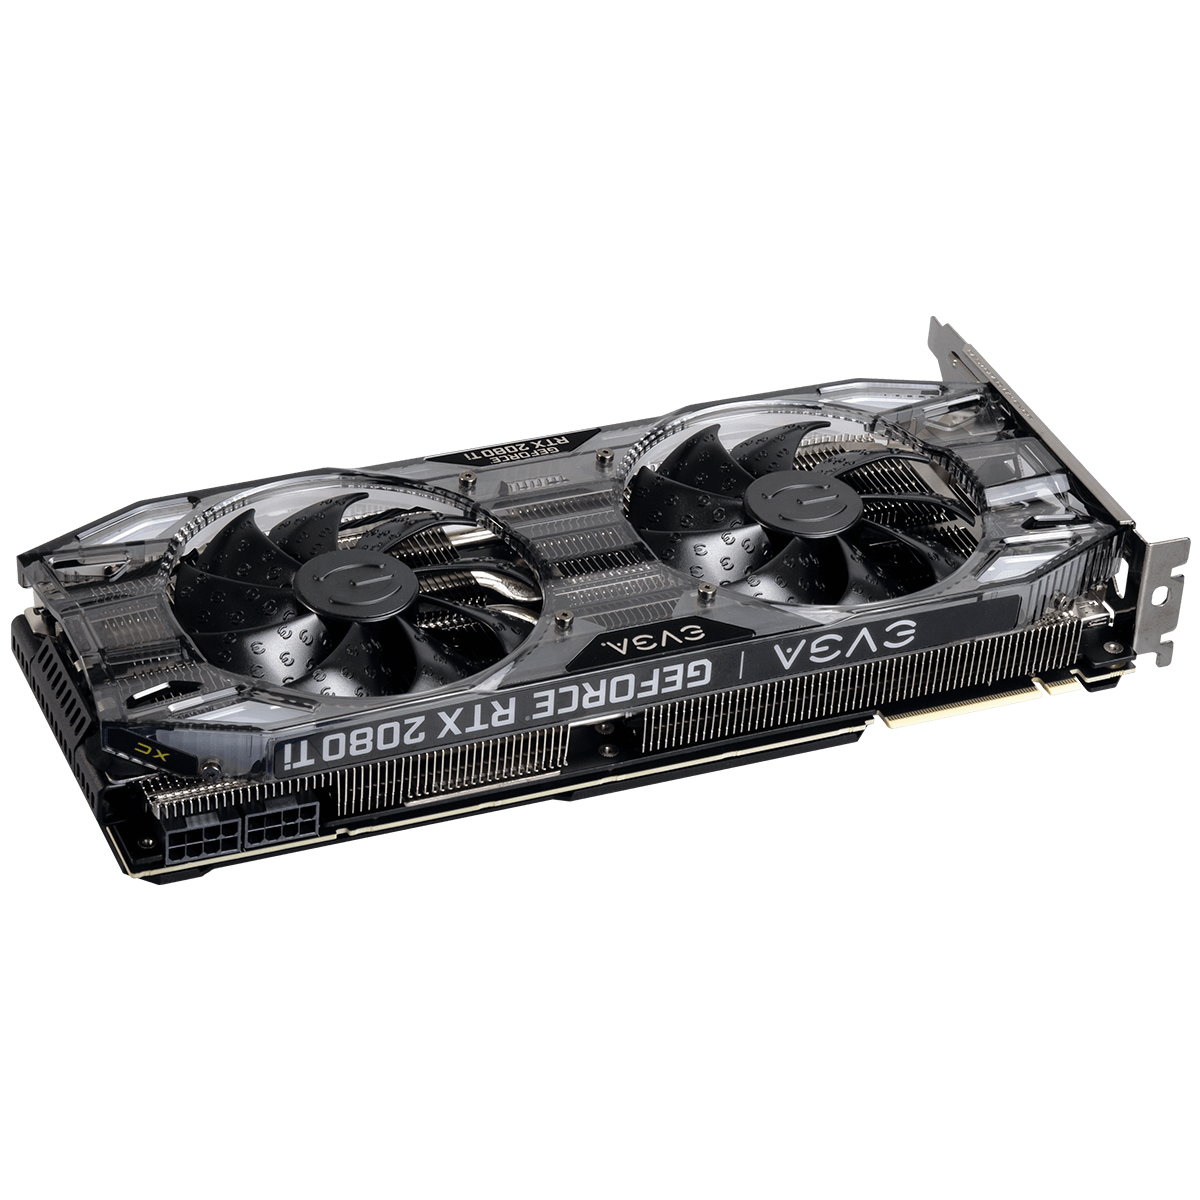 https://images.evga.com/products/gallery//png/11G-P4-2282-KR_XL_6.png